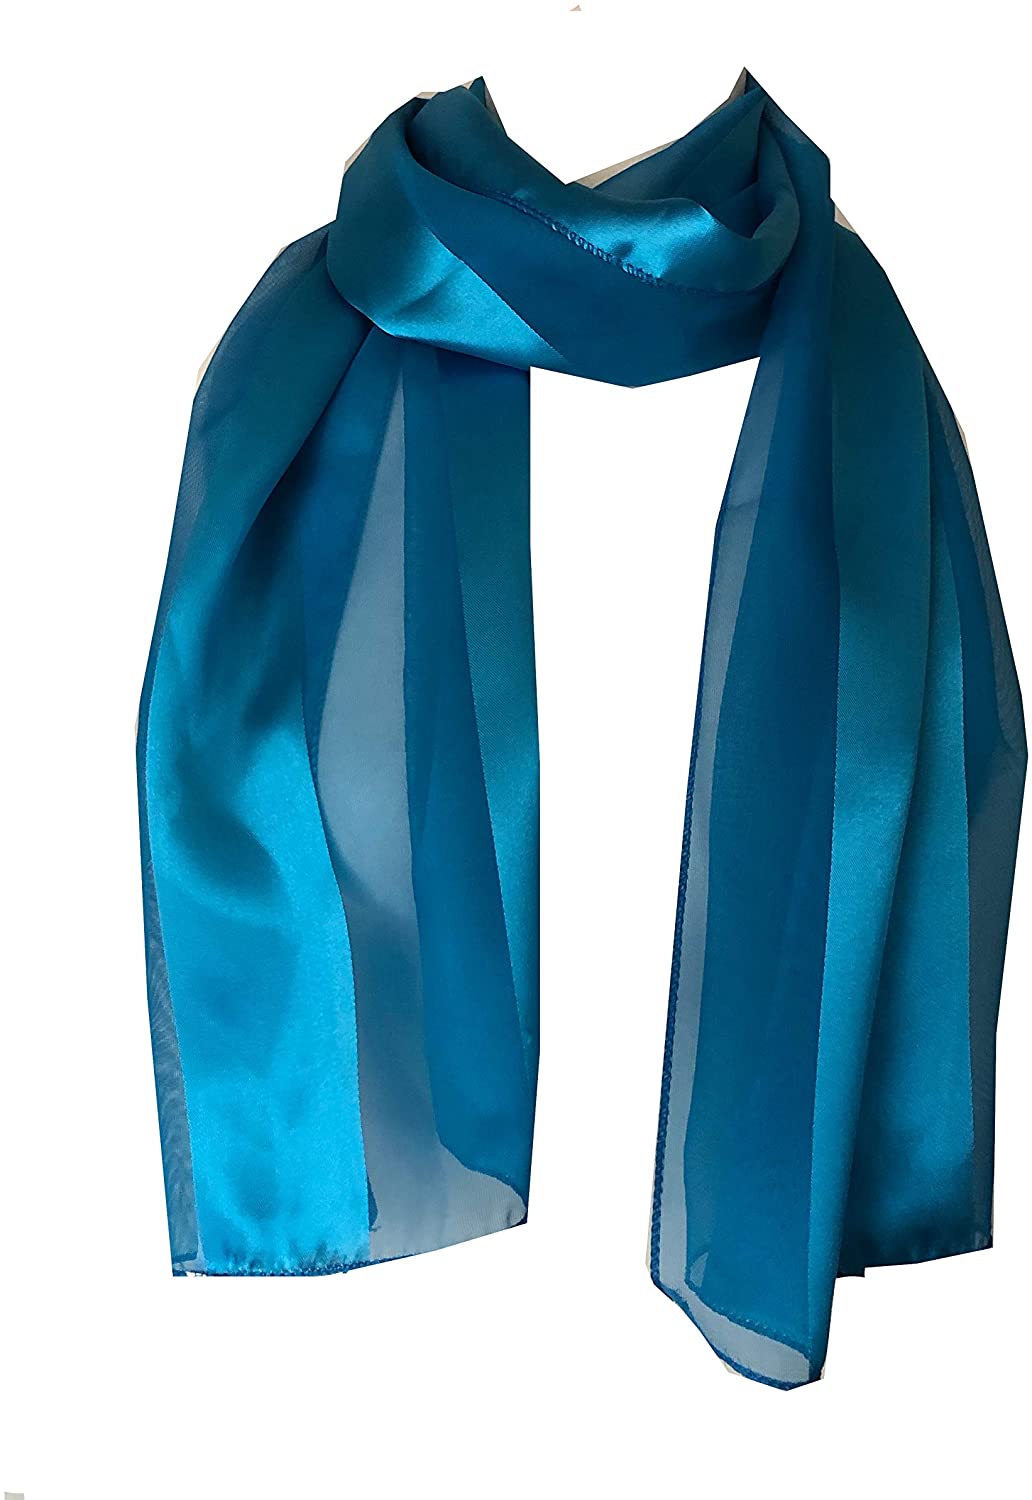 Plain Blue Faux Chiffon and Satin Style Striped Scarf Thin Pretty Scarf Great for Any Outfit Lovely Gift